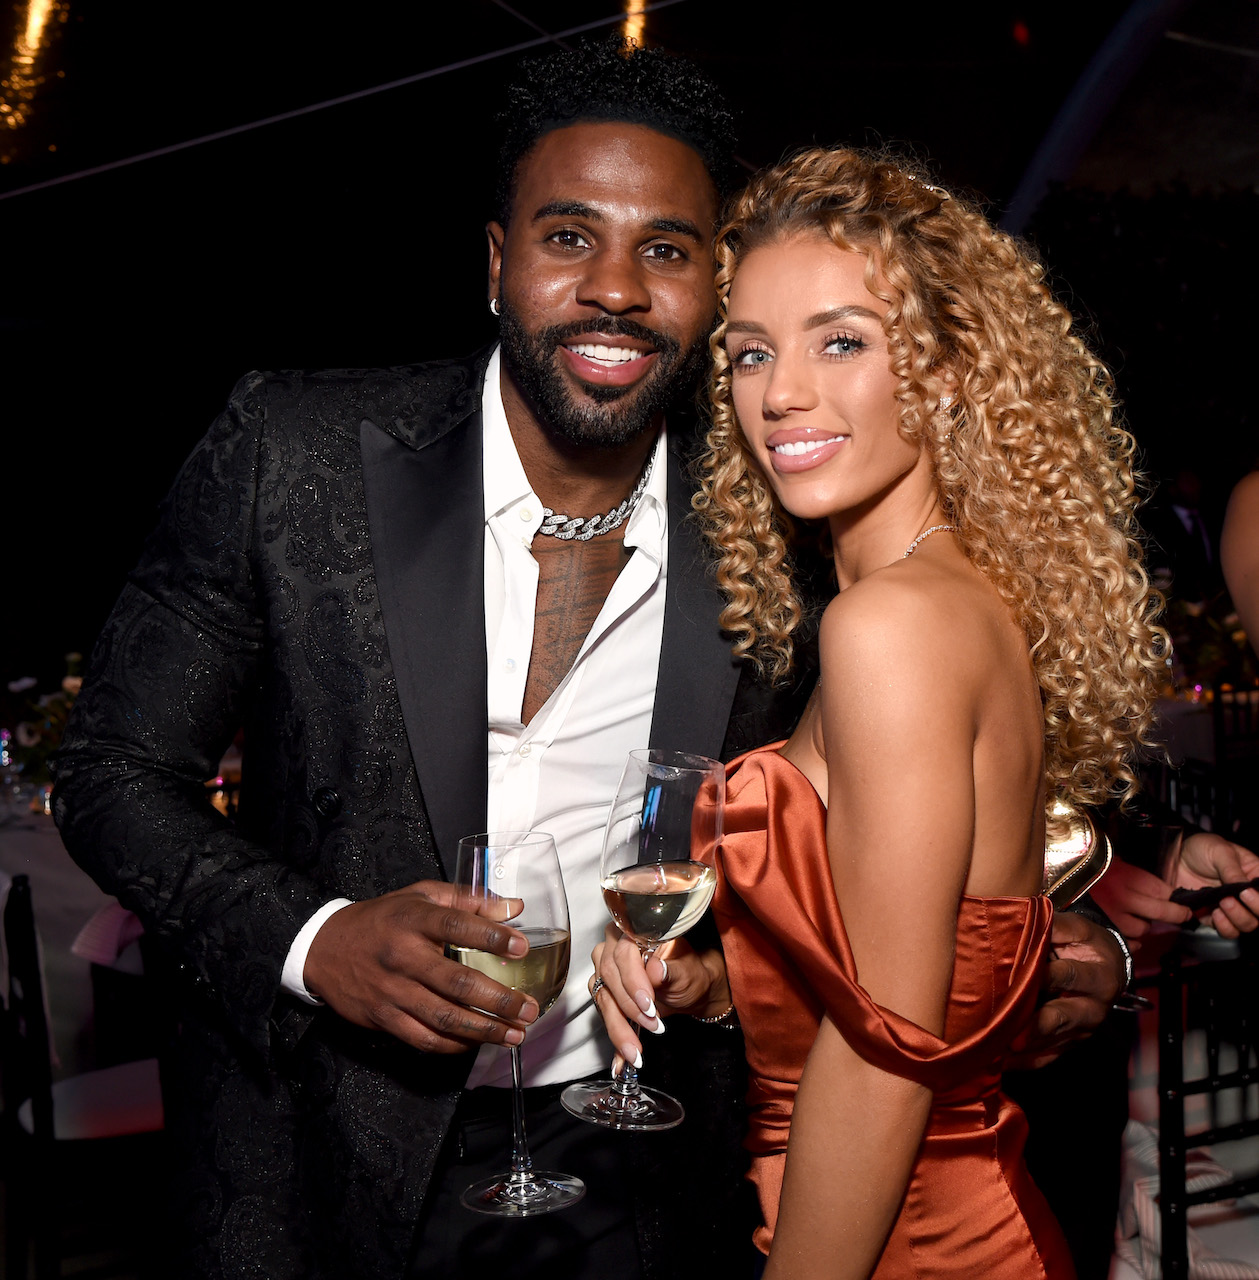 Jason Derulo and Jena Frumes; Derulo recently brought Frumes a house